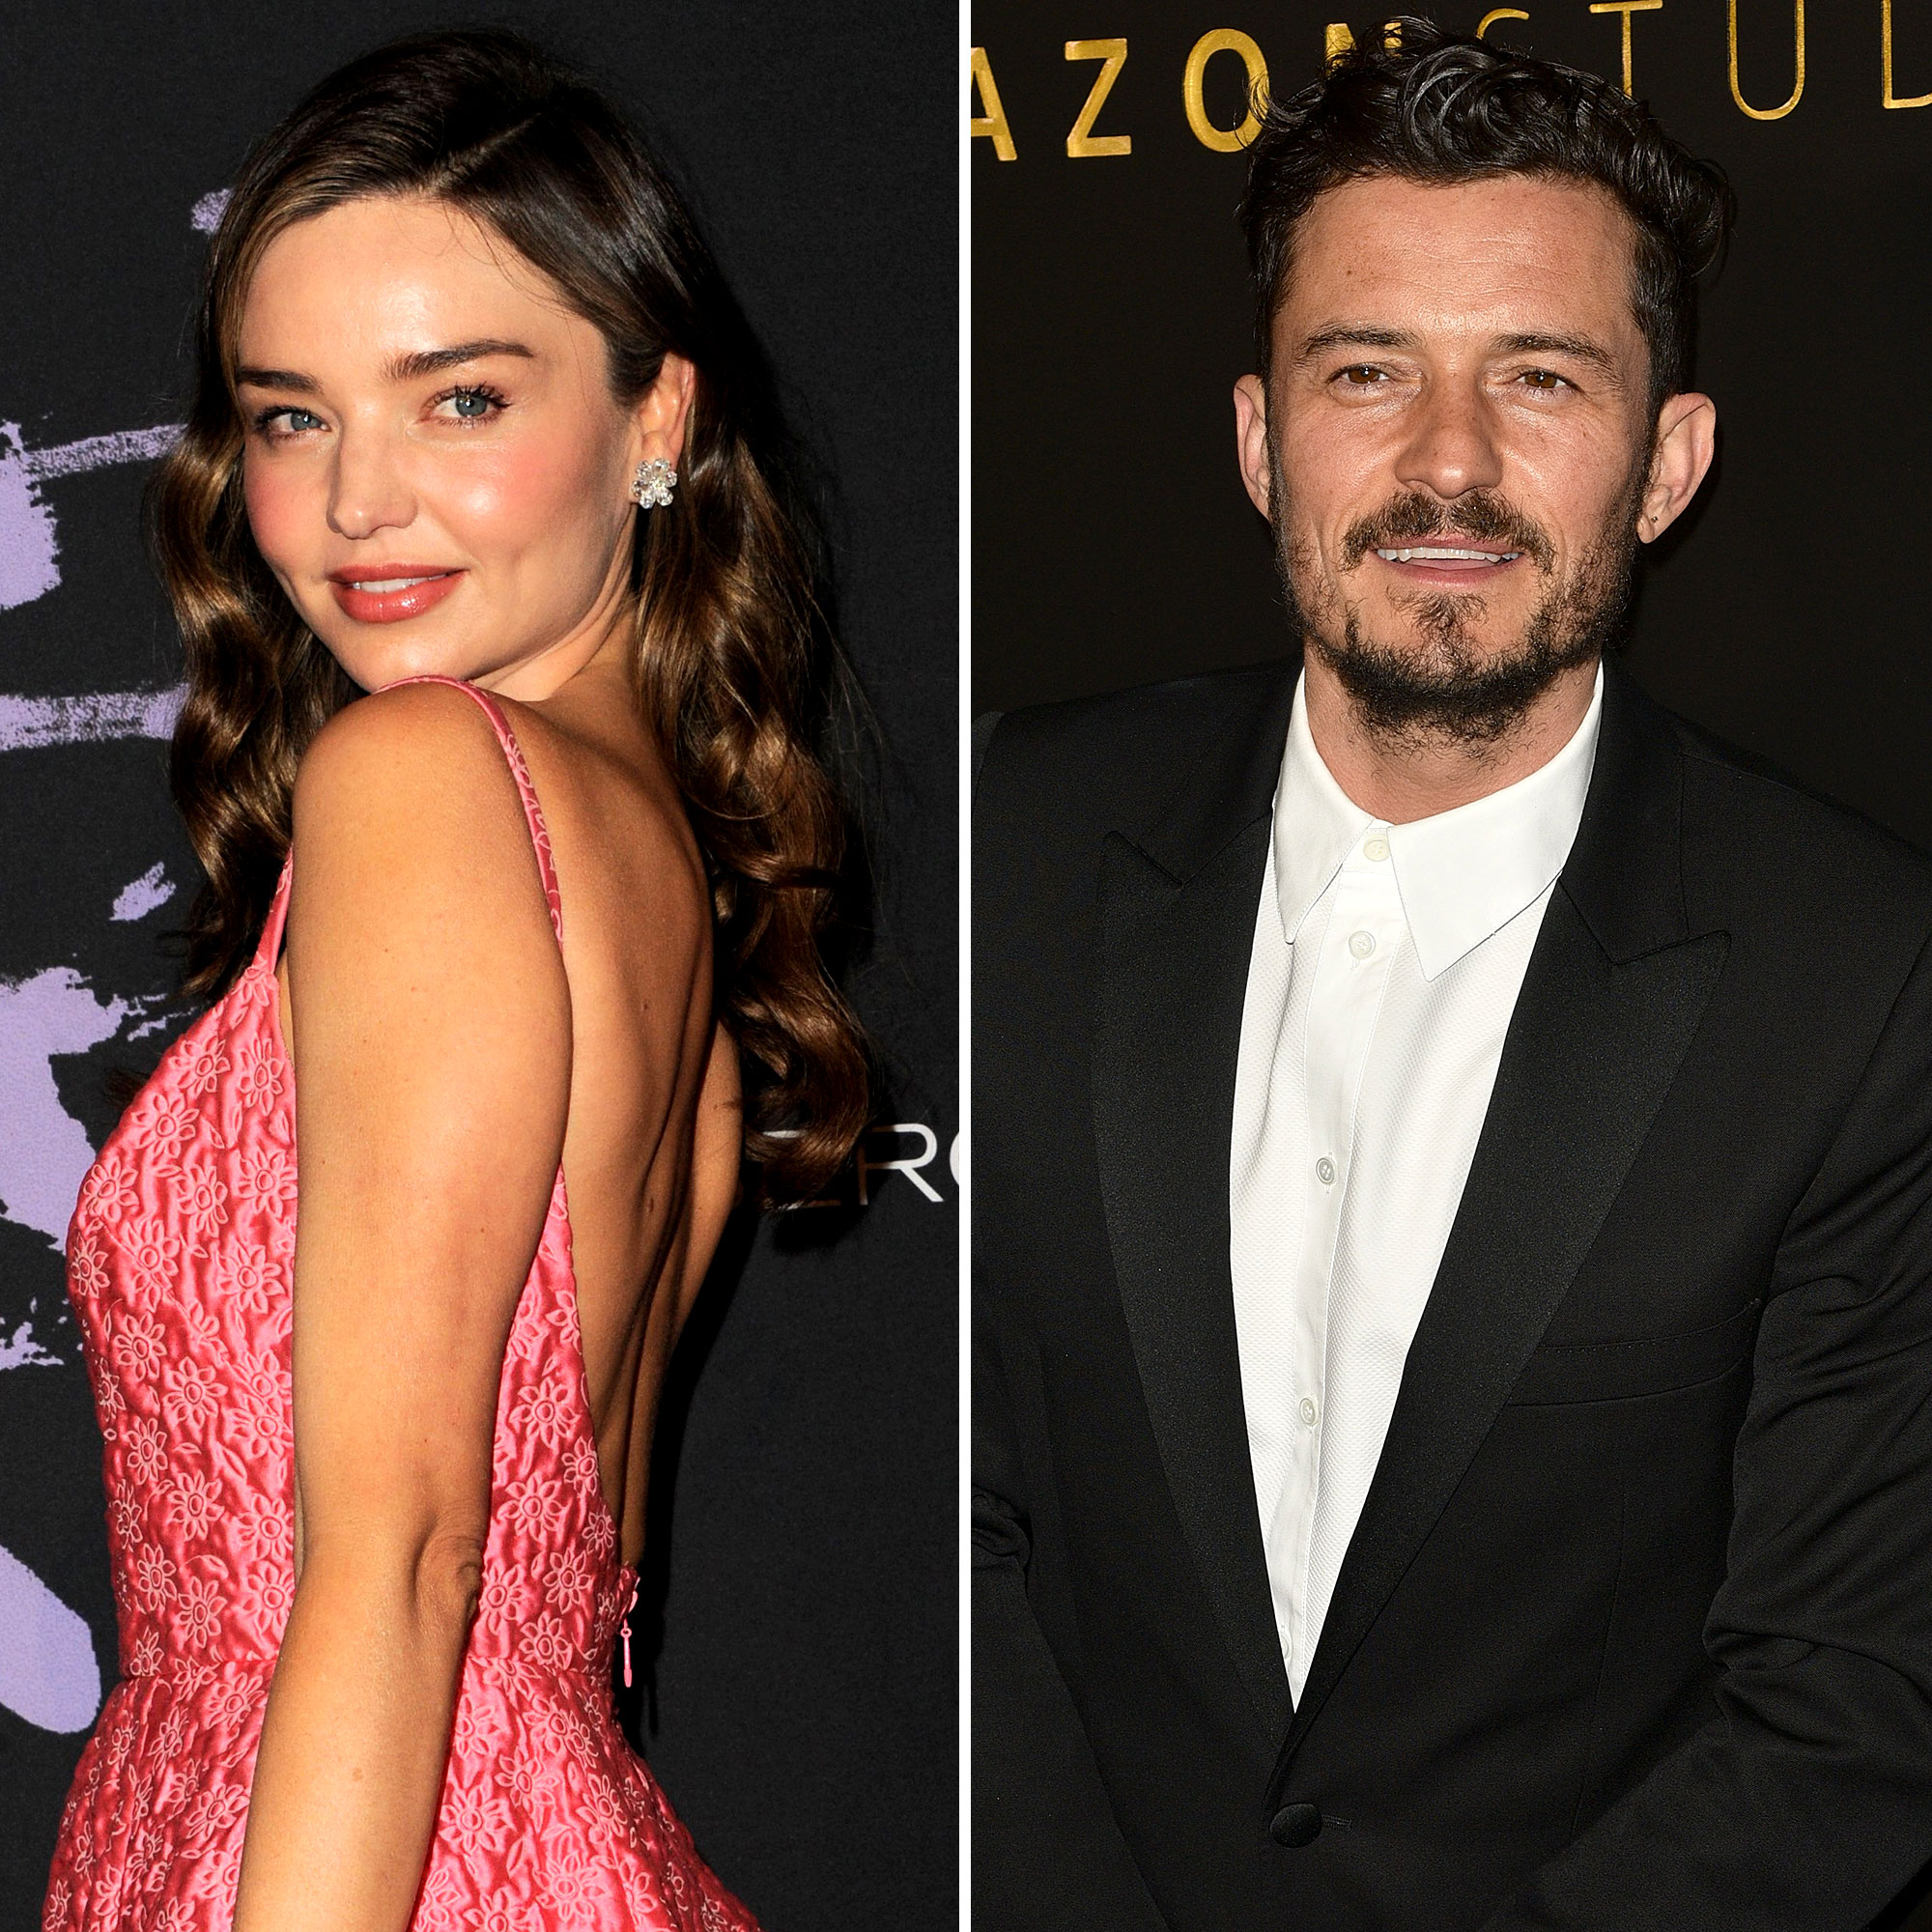 https://www.usmagazine.com/wp-content/uploads/2022/07/How-Does-Miranda-Kerr-Really-Feel-About-Coparenting-With-Ex-Orlando-Bloom.jpg?quality=62&strip=all